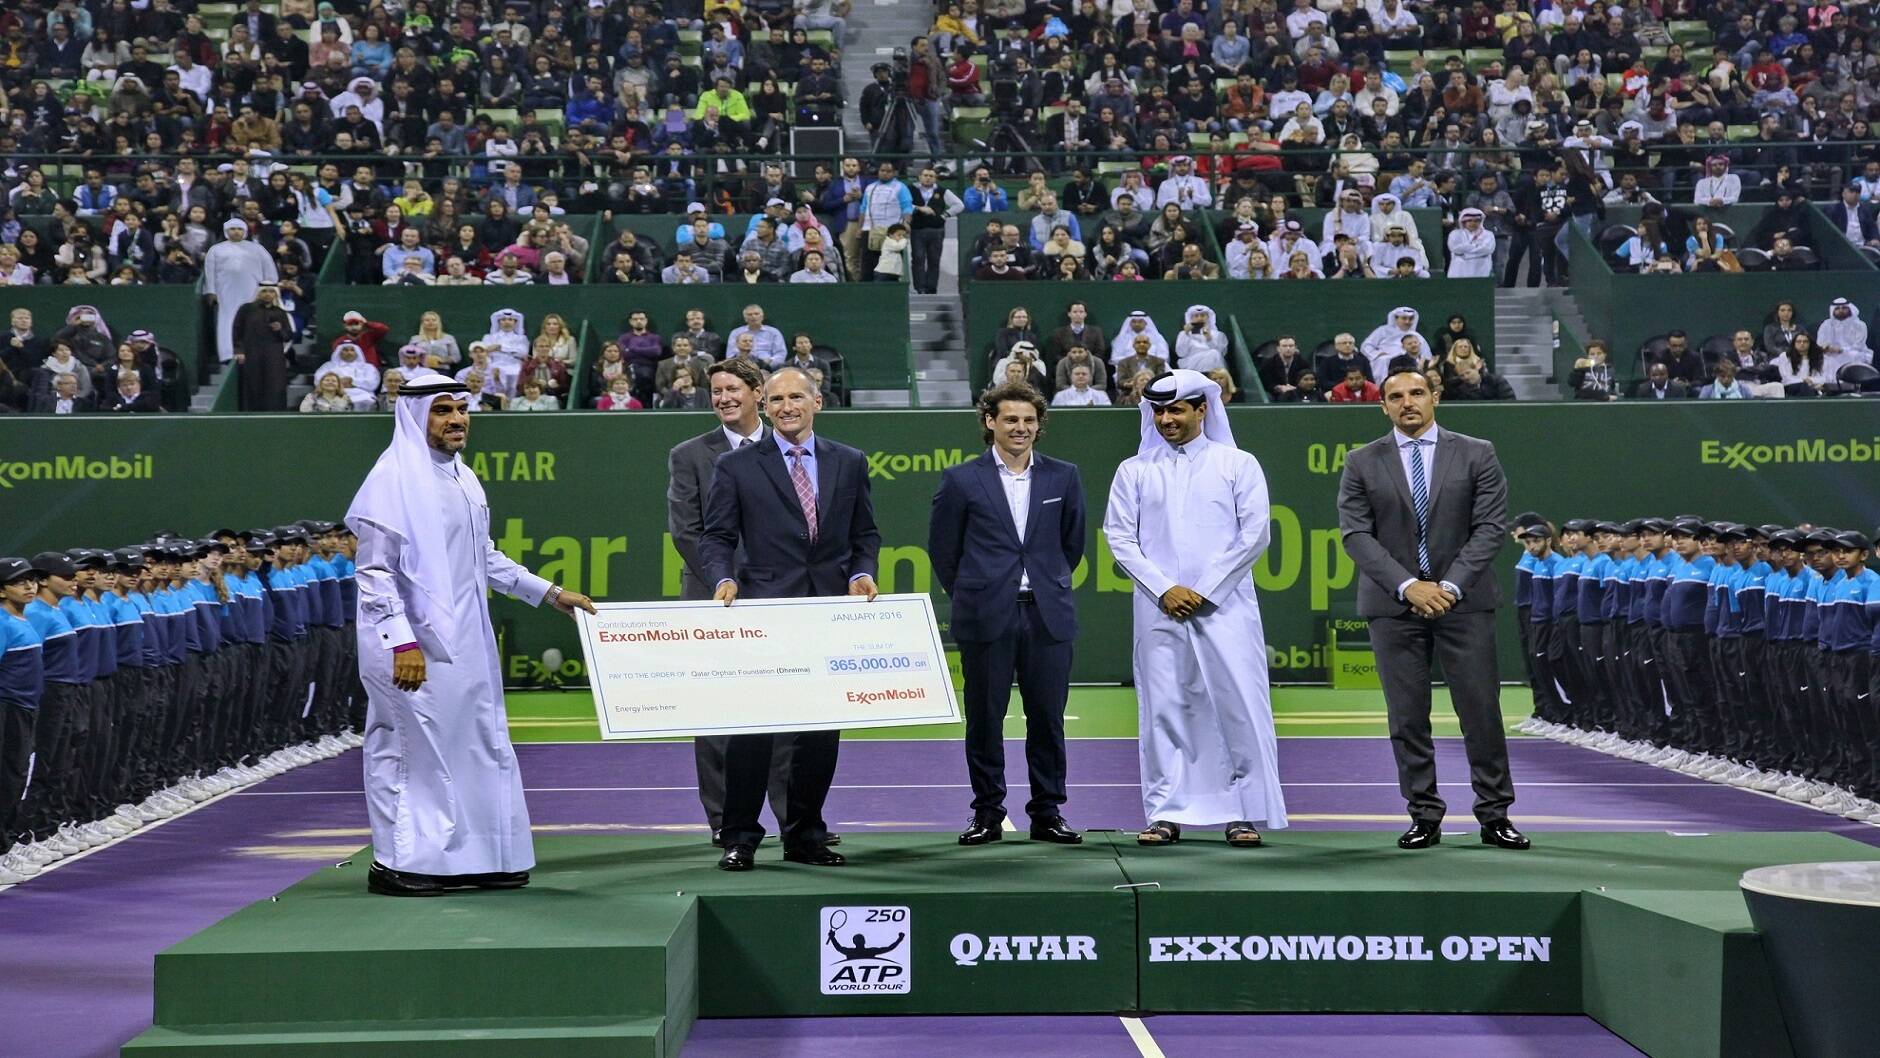 During the 2016 closing ceremony, Alistair Routledge, President and General Manager for ExxonMobil Qatar, presented a check to Issa Salman Al Kuwari, Deputy General Manager for Dhreima, to support the Orphans Care Center Qatar (Dhreima).